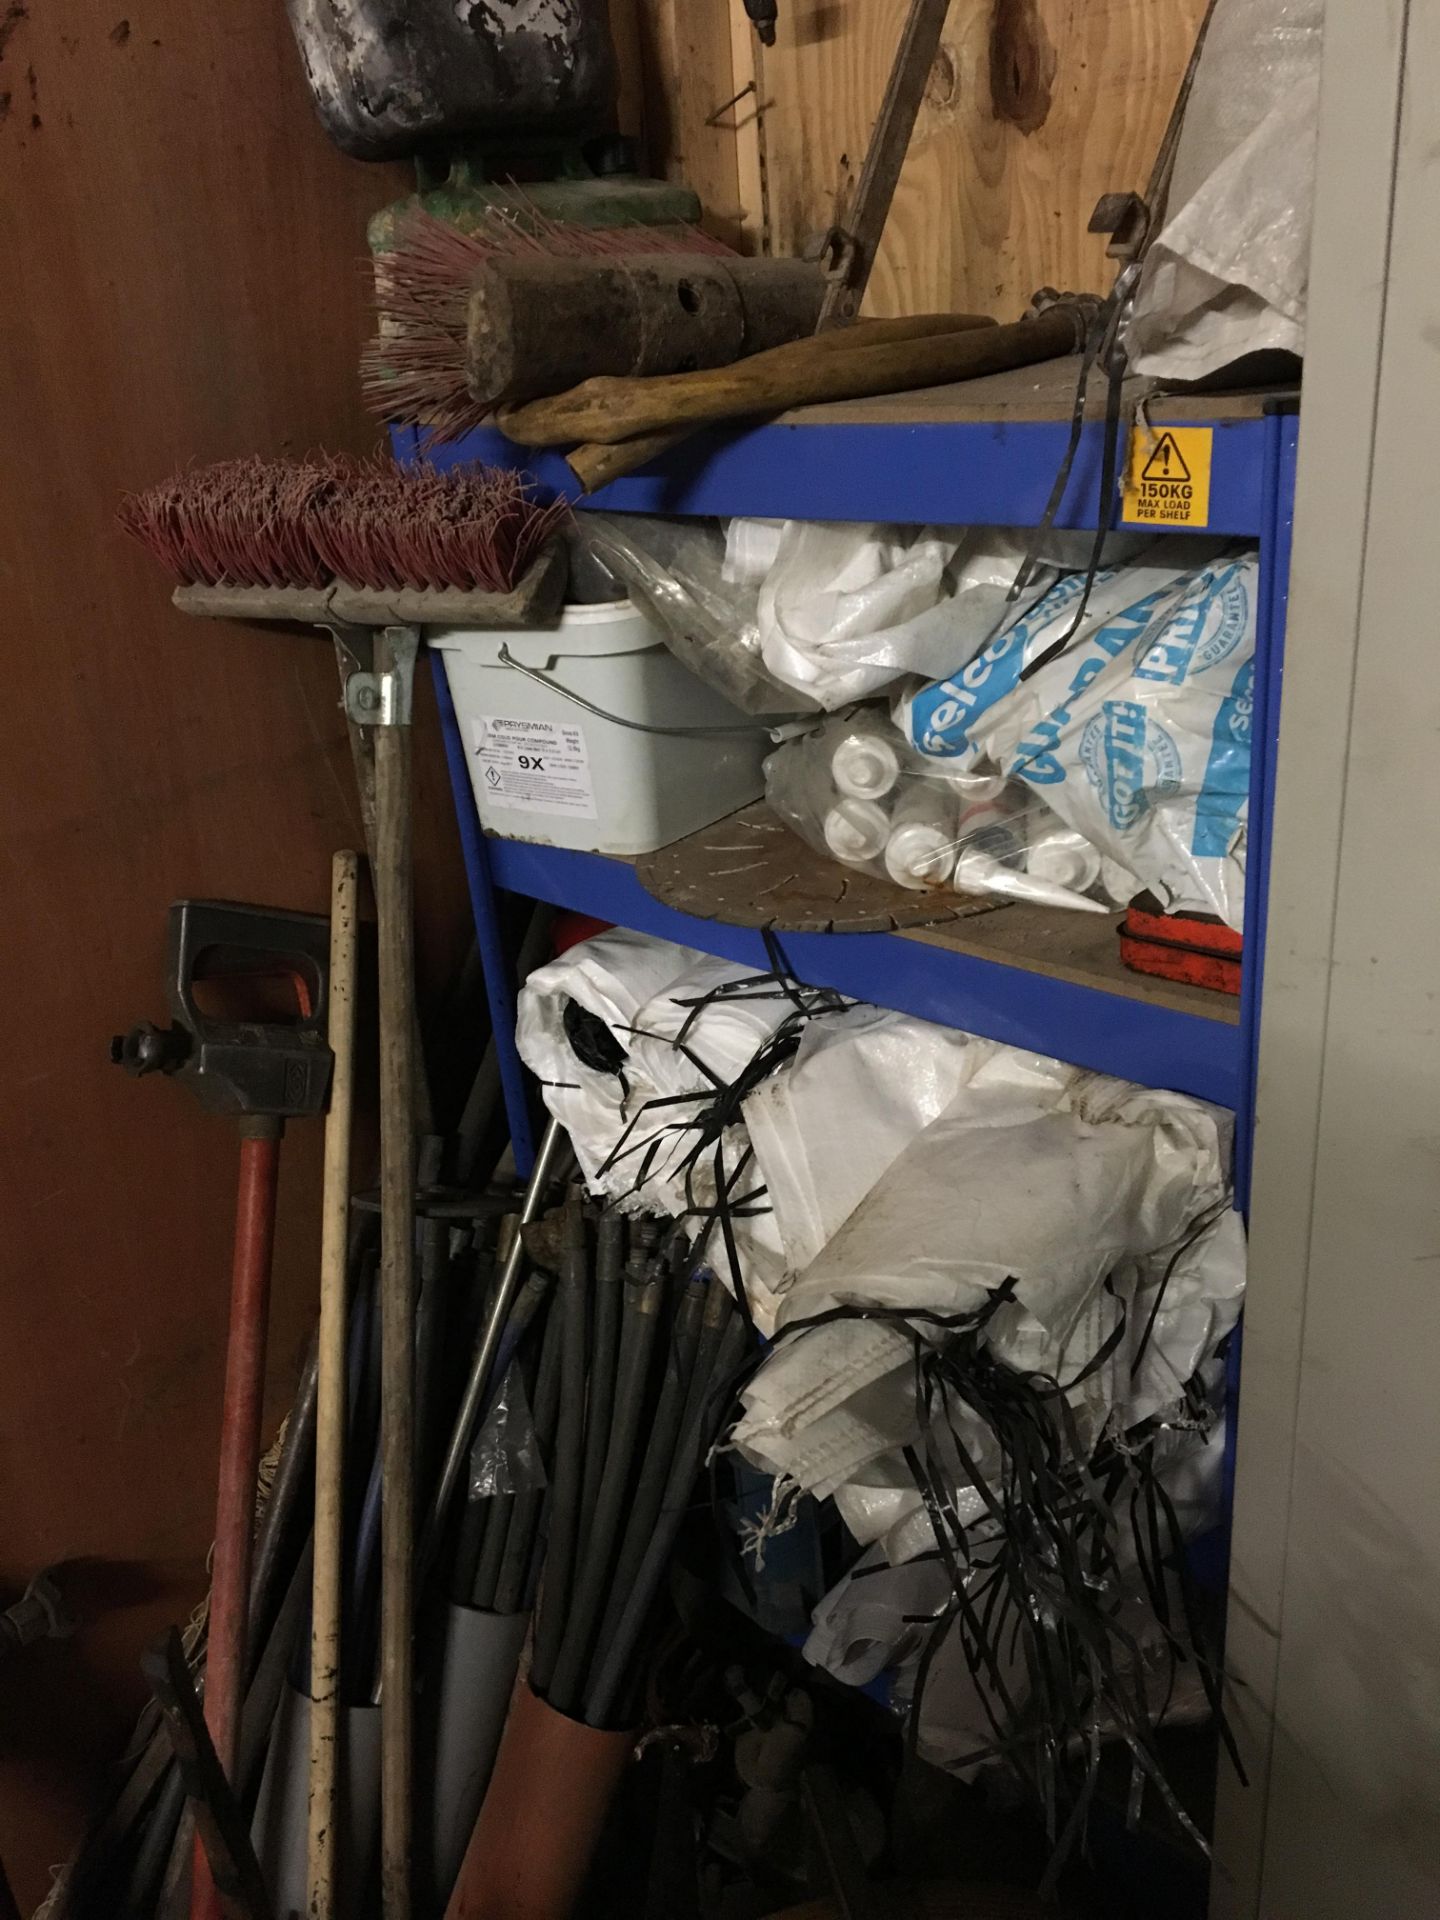 2 x metal cabinets & contents - vehicle spares, rods, racking & contents & wheel barrow wheels. - Image 5 of 7